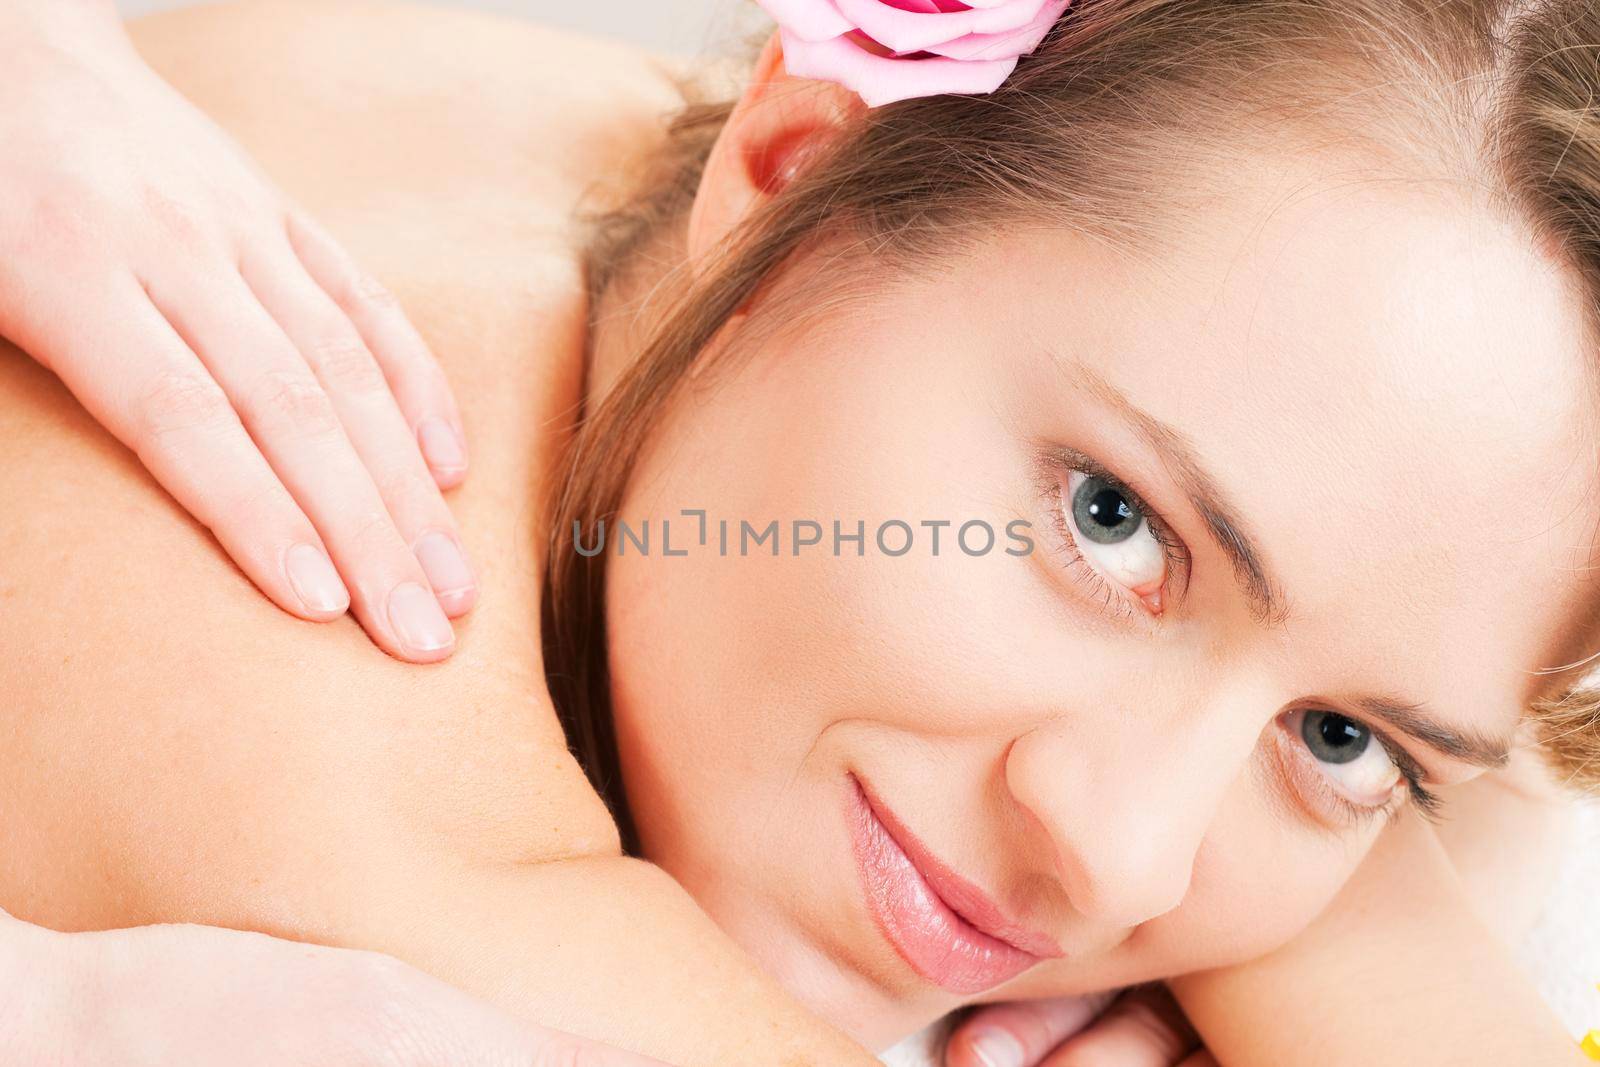 Beautiful woman having a wellness back massage and feeling visibly good about it